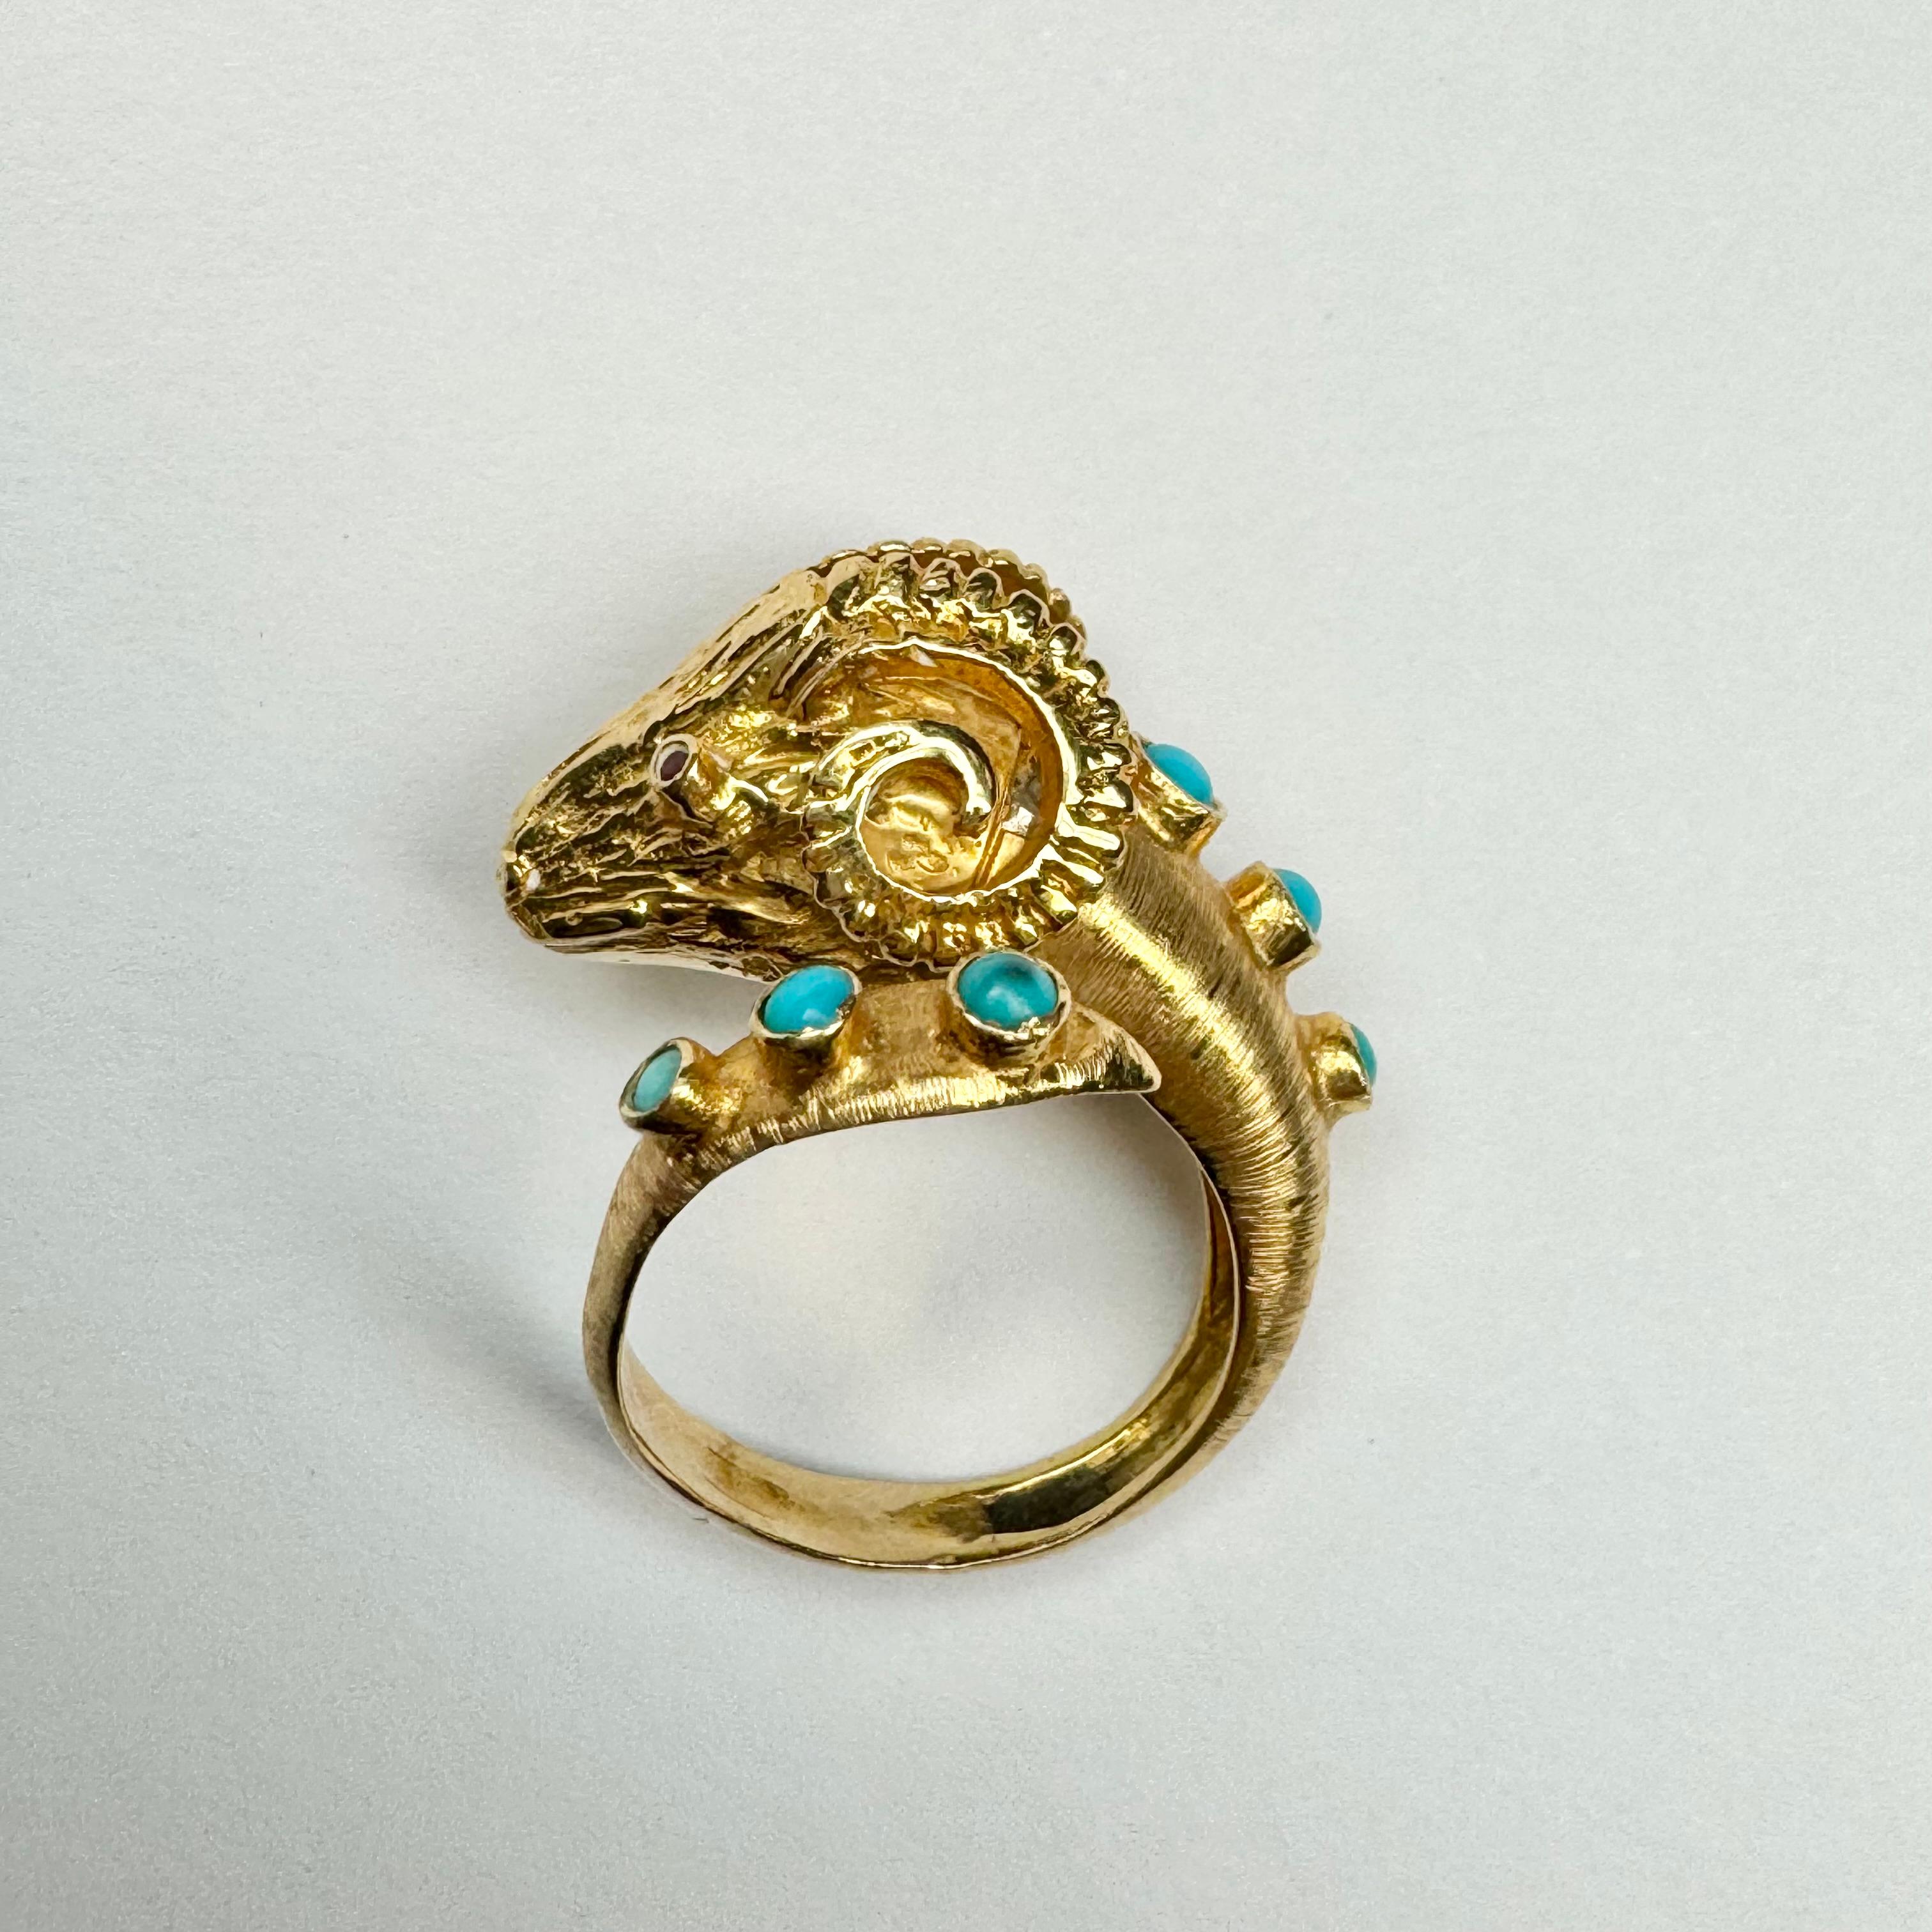 Incredibly unique vintage wrap ring in solid 18K gold. The ram's head is artistically crafted in solid yellow gold with glittering ruby eyes, bezel set. There are six beautiful cabochon turquoise running along the back and accenting the end of the